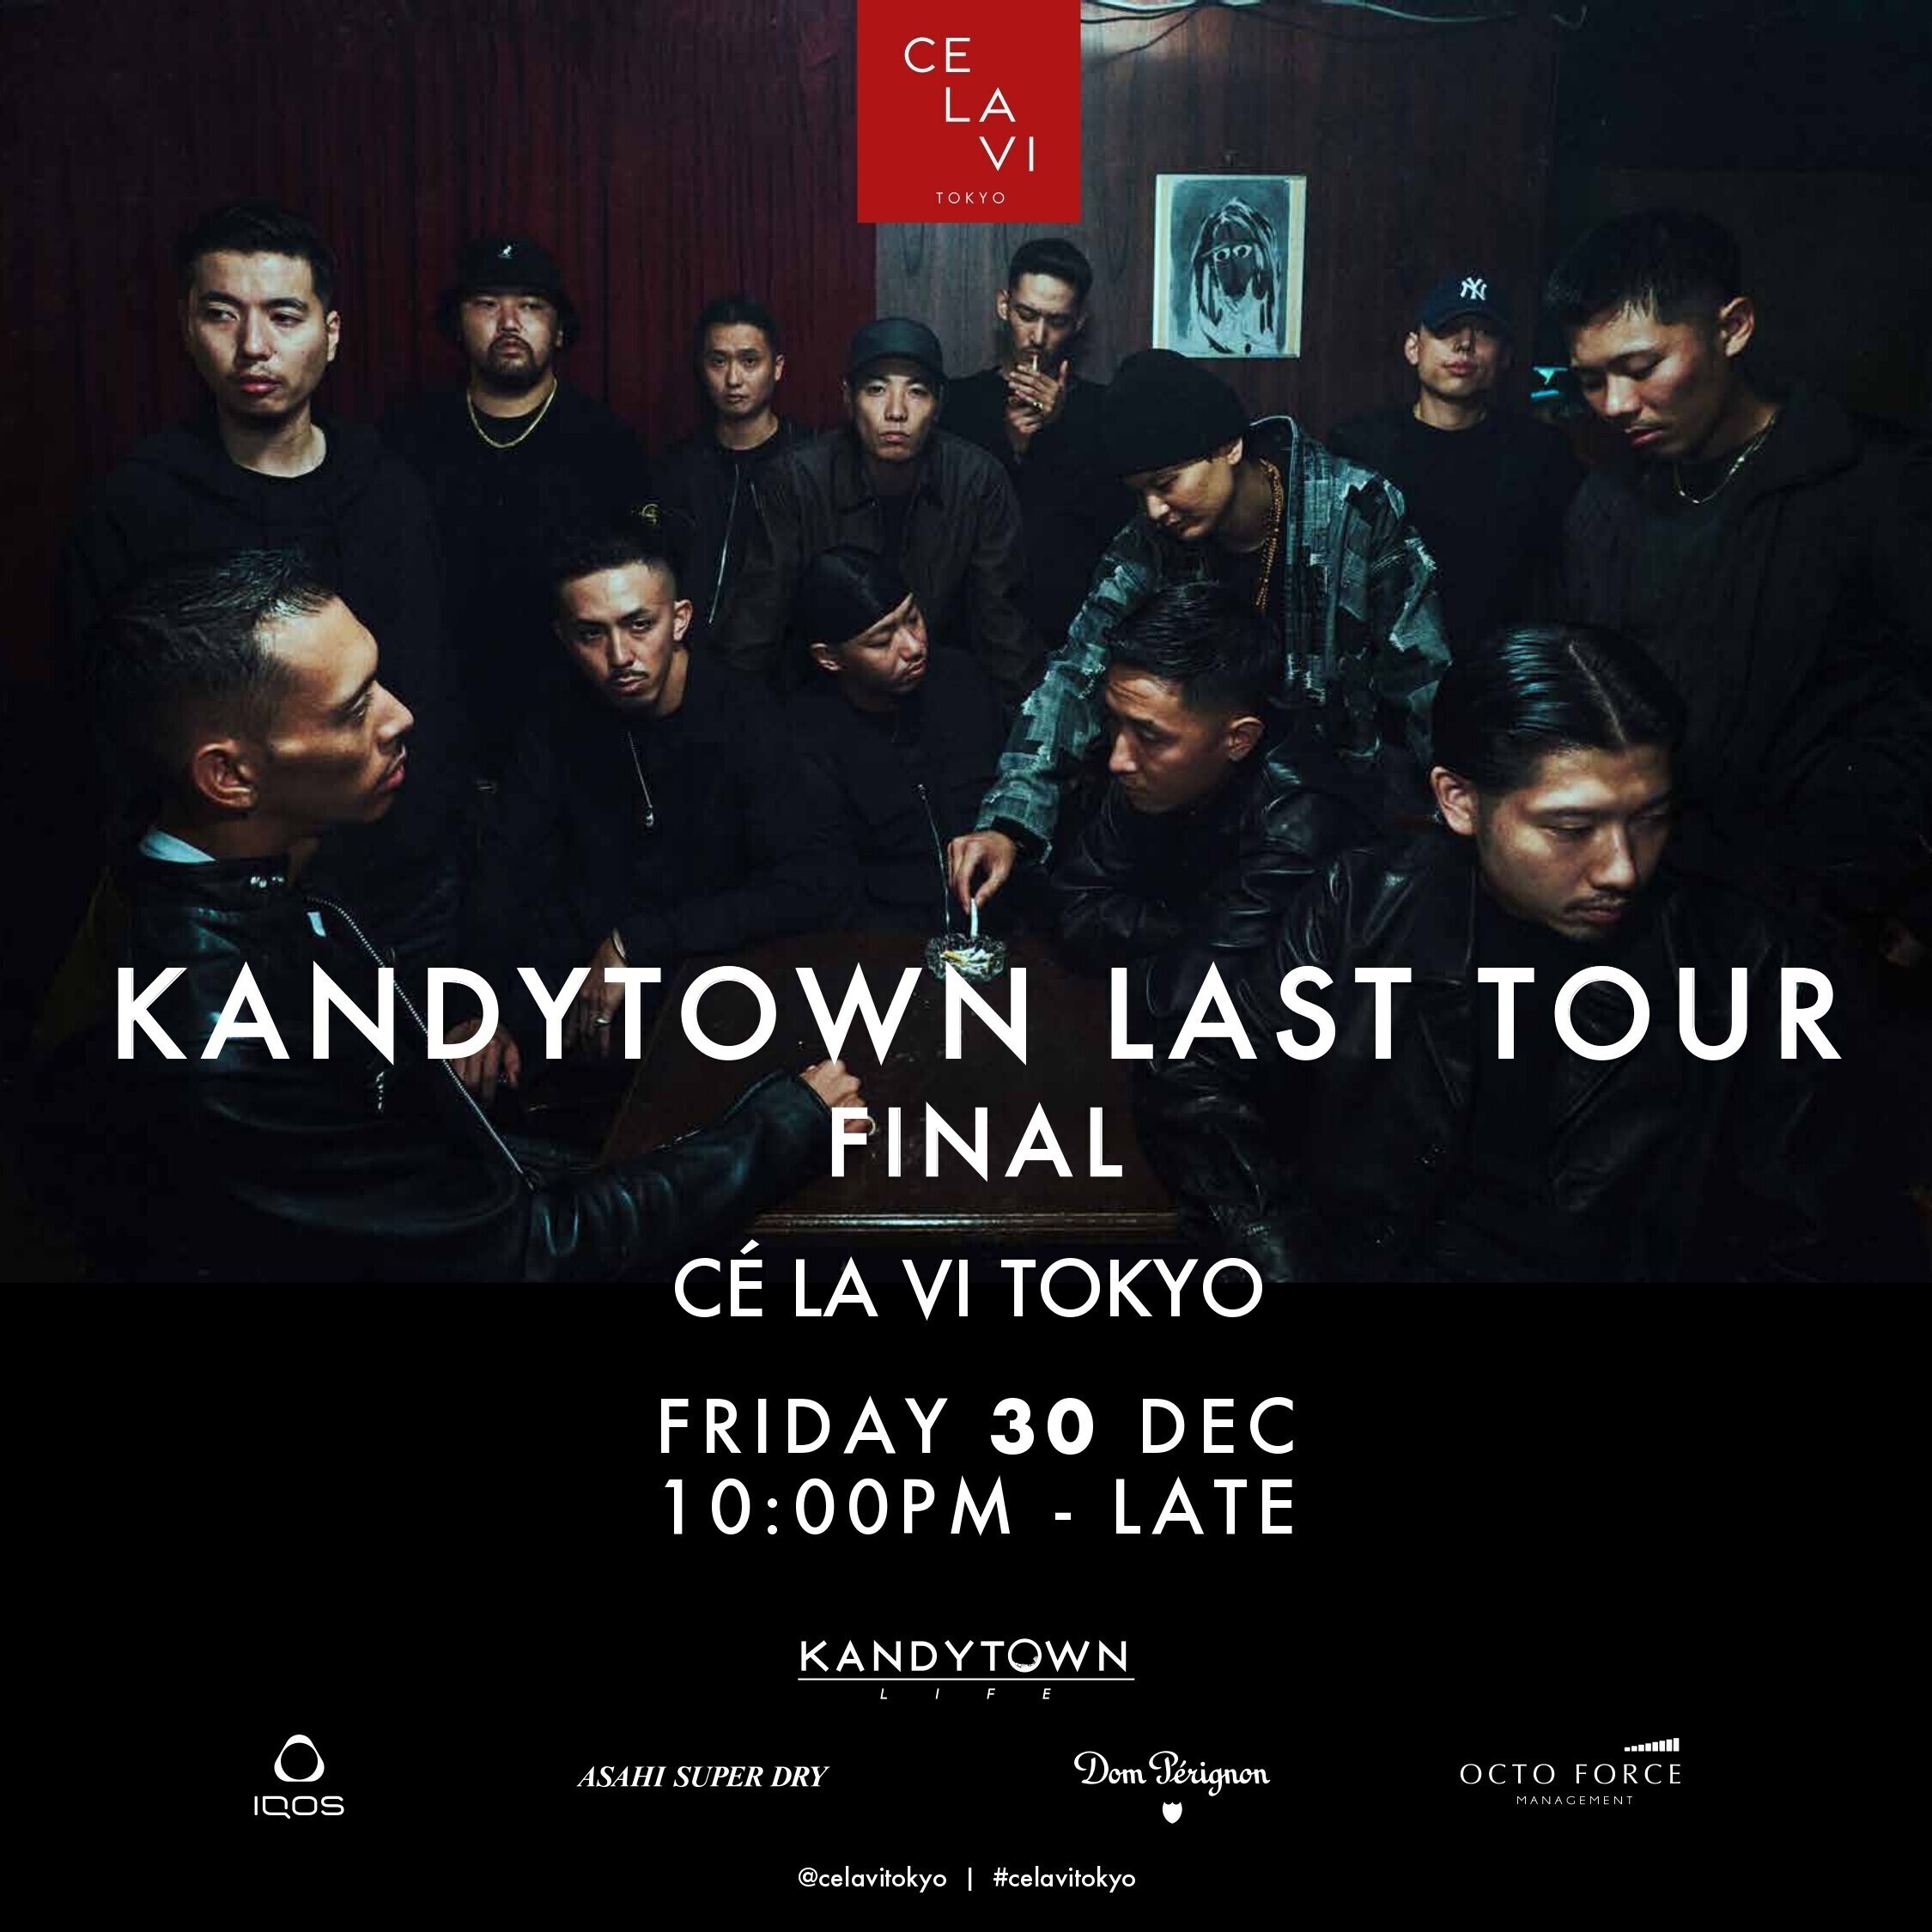 iFLYER: KANDYTOWN, Tokyo's leading HIPHOP crew scheduled to 